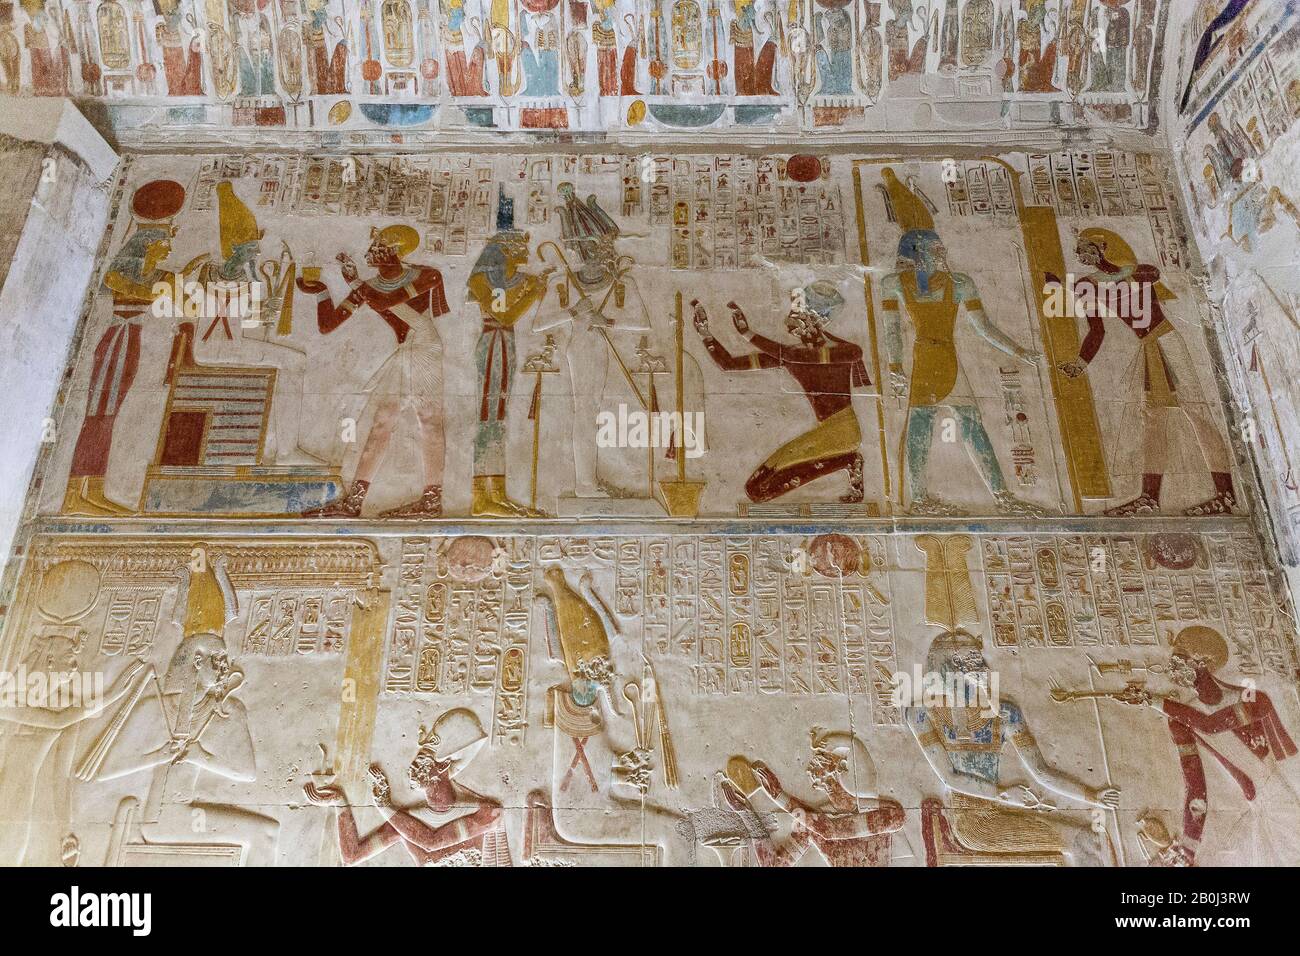 Bas-relief carvings in the Temple of Seti I, Abydos Stock Photo